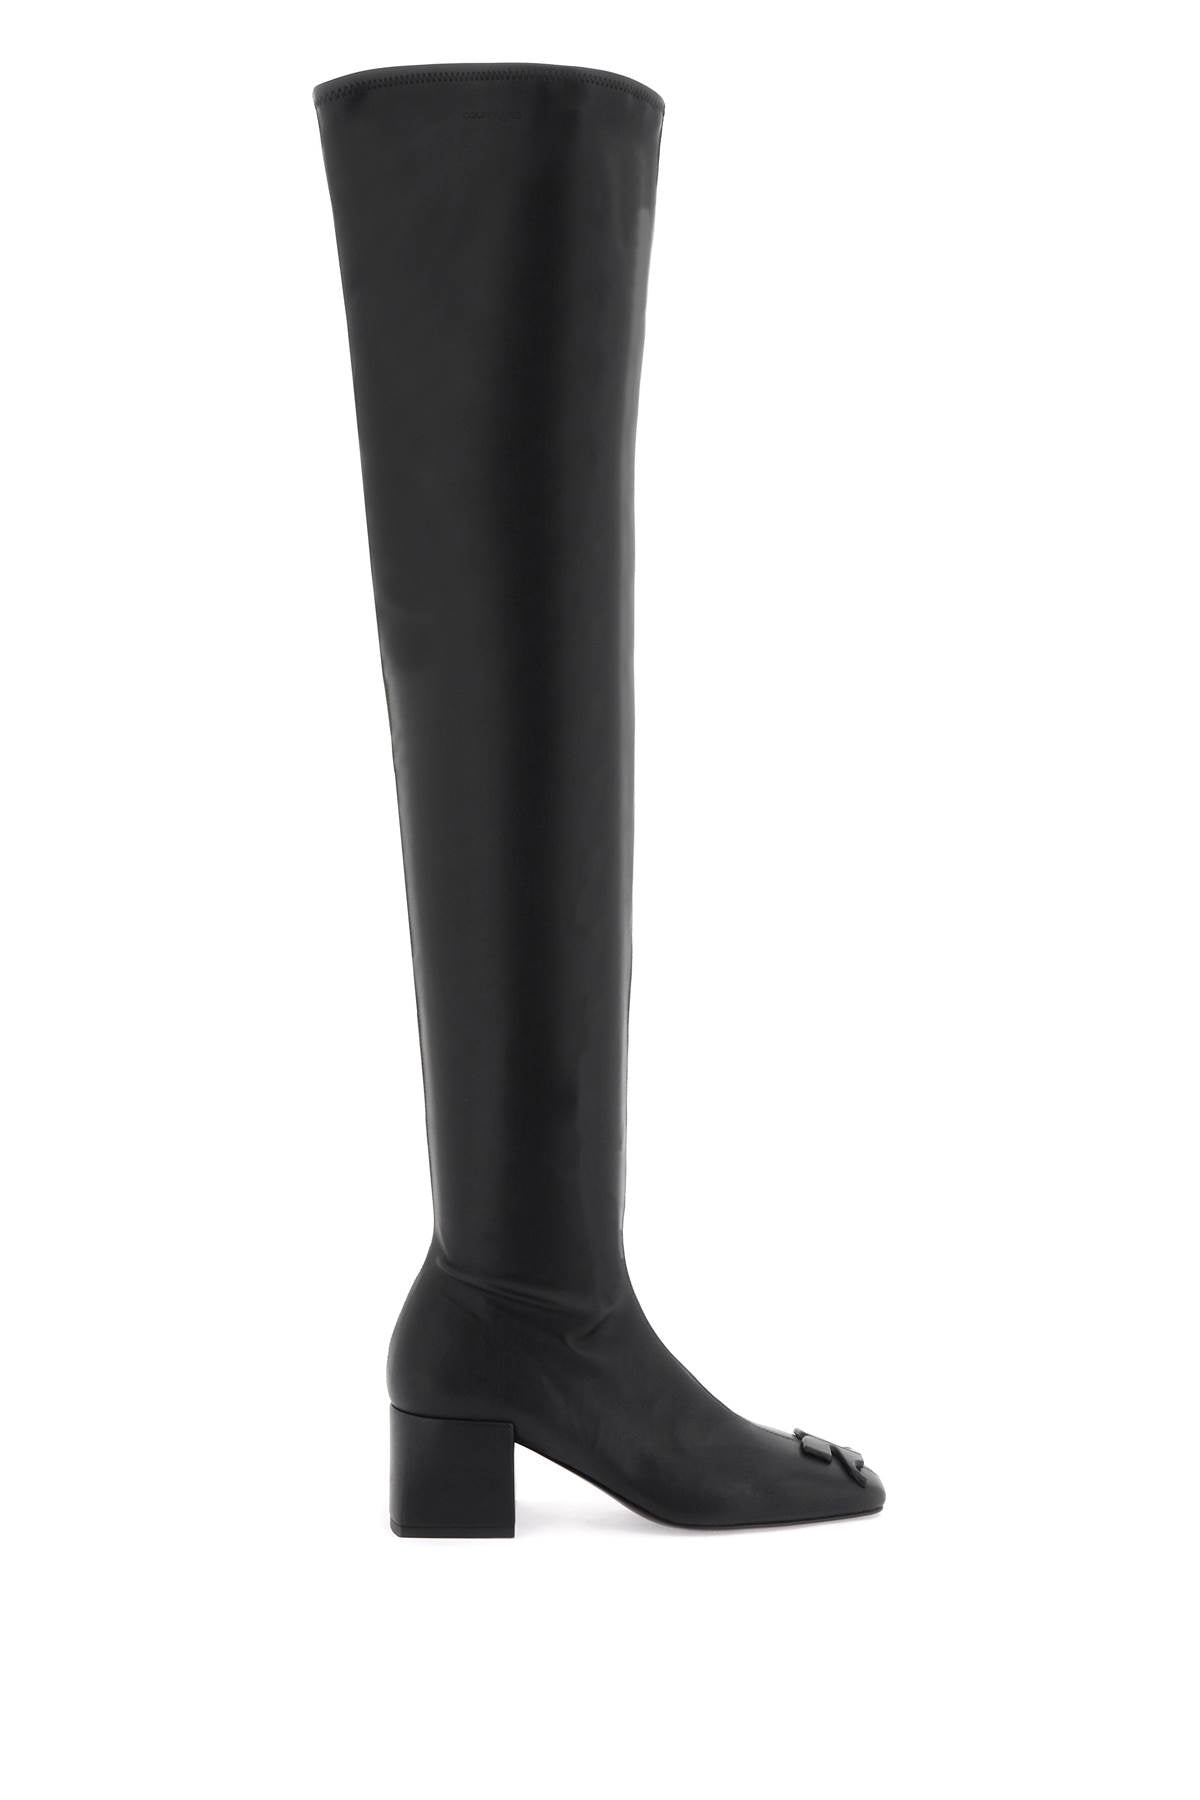 Courreges faux leather high boots-0